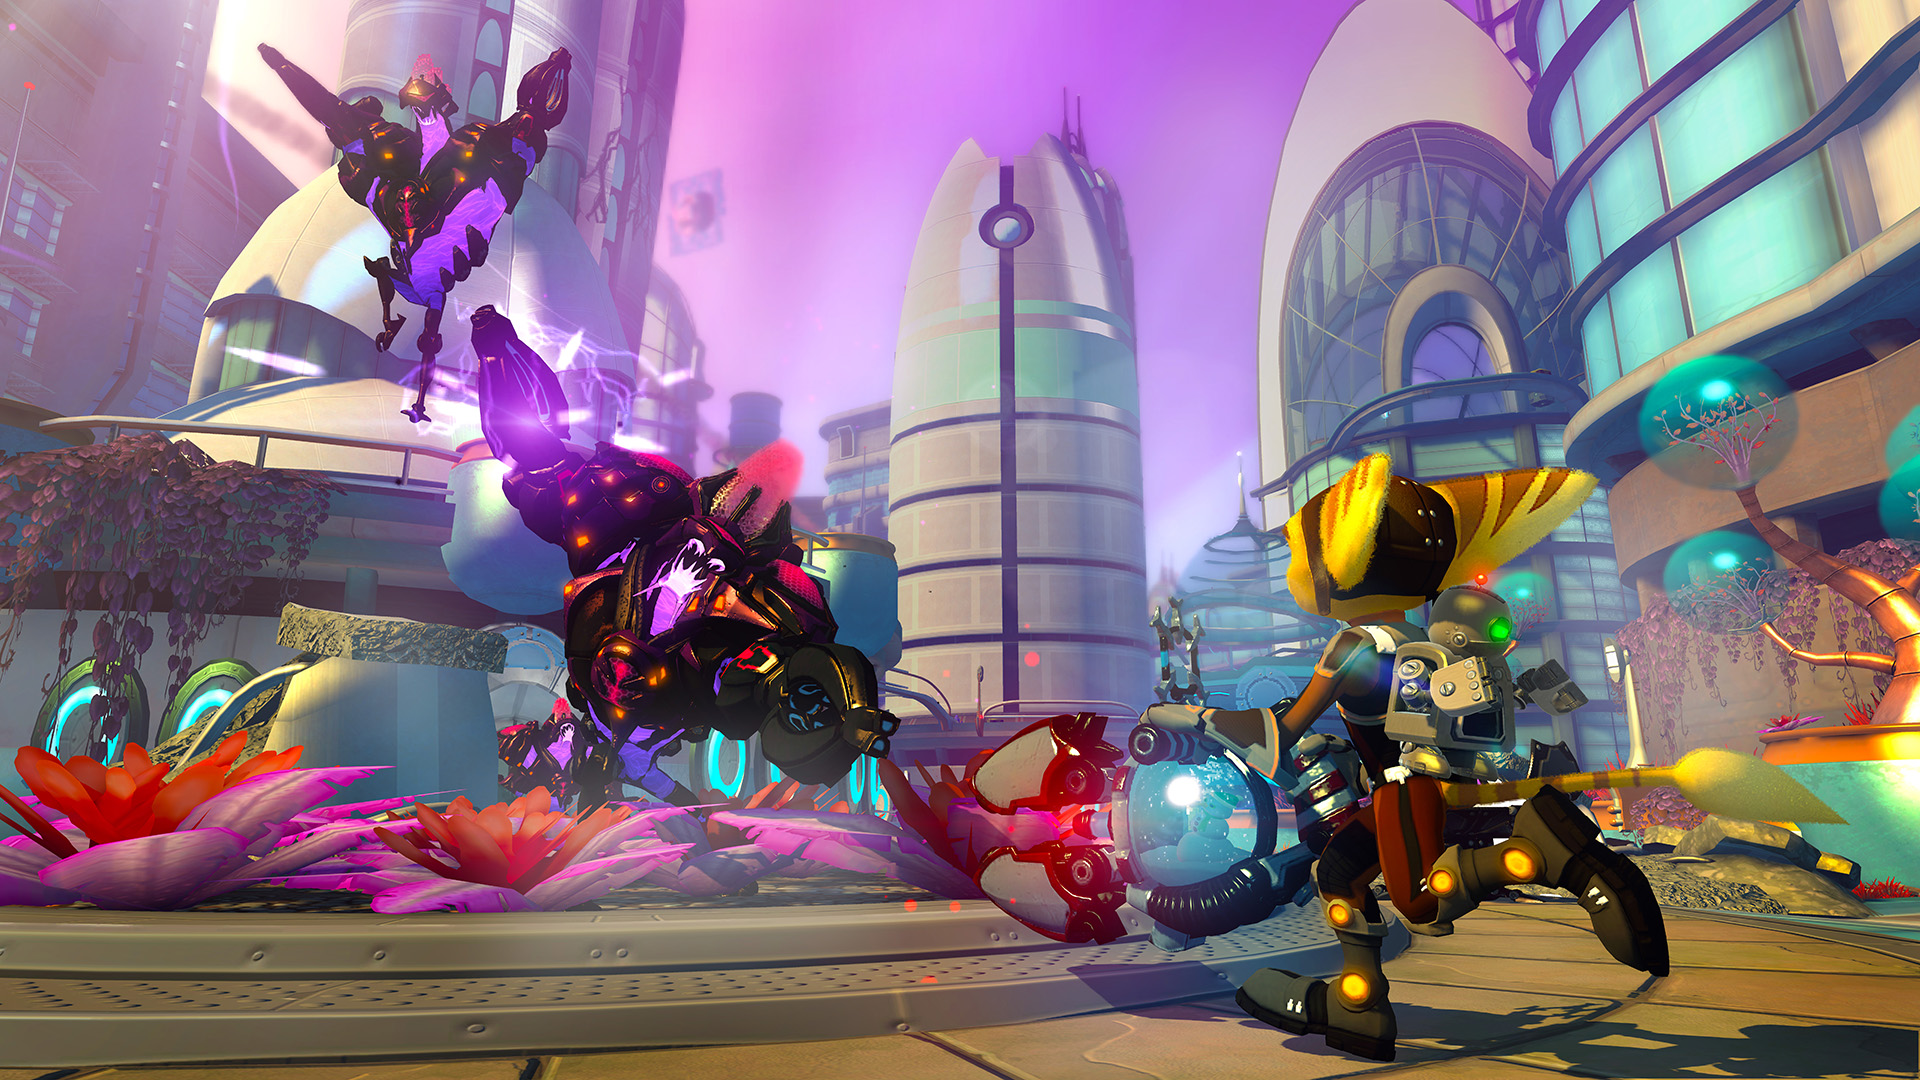 download ratchet and clank into the nexus ps5